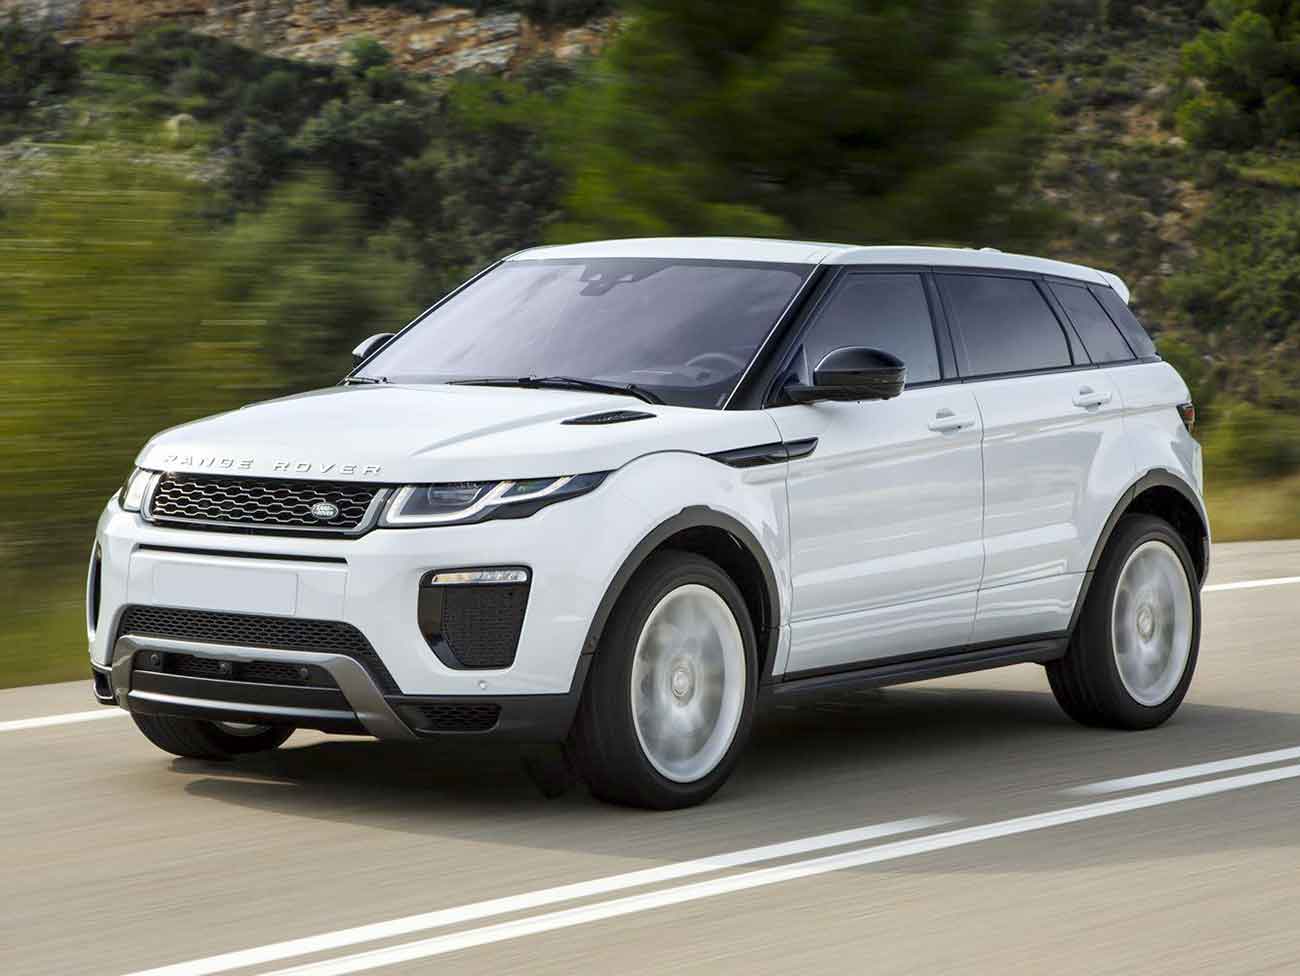 Image of someone driving Land Rover Evoque